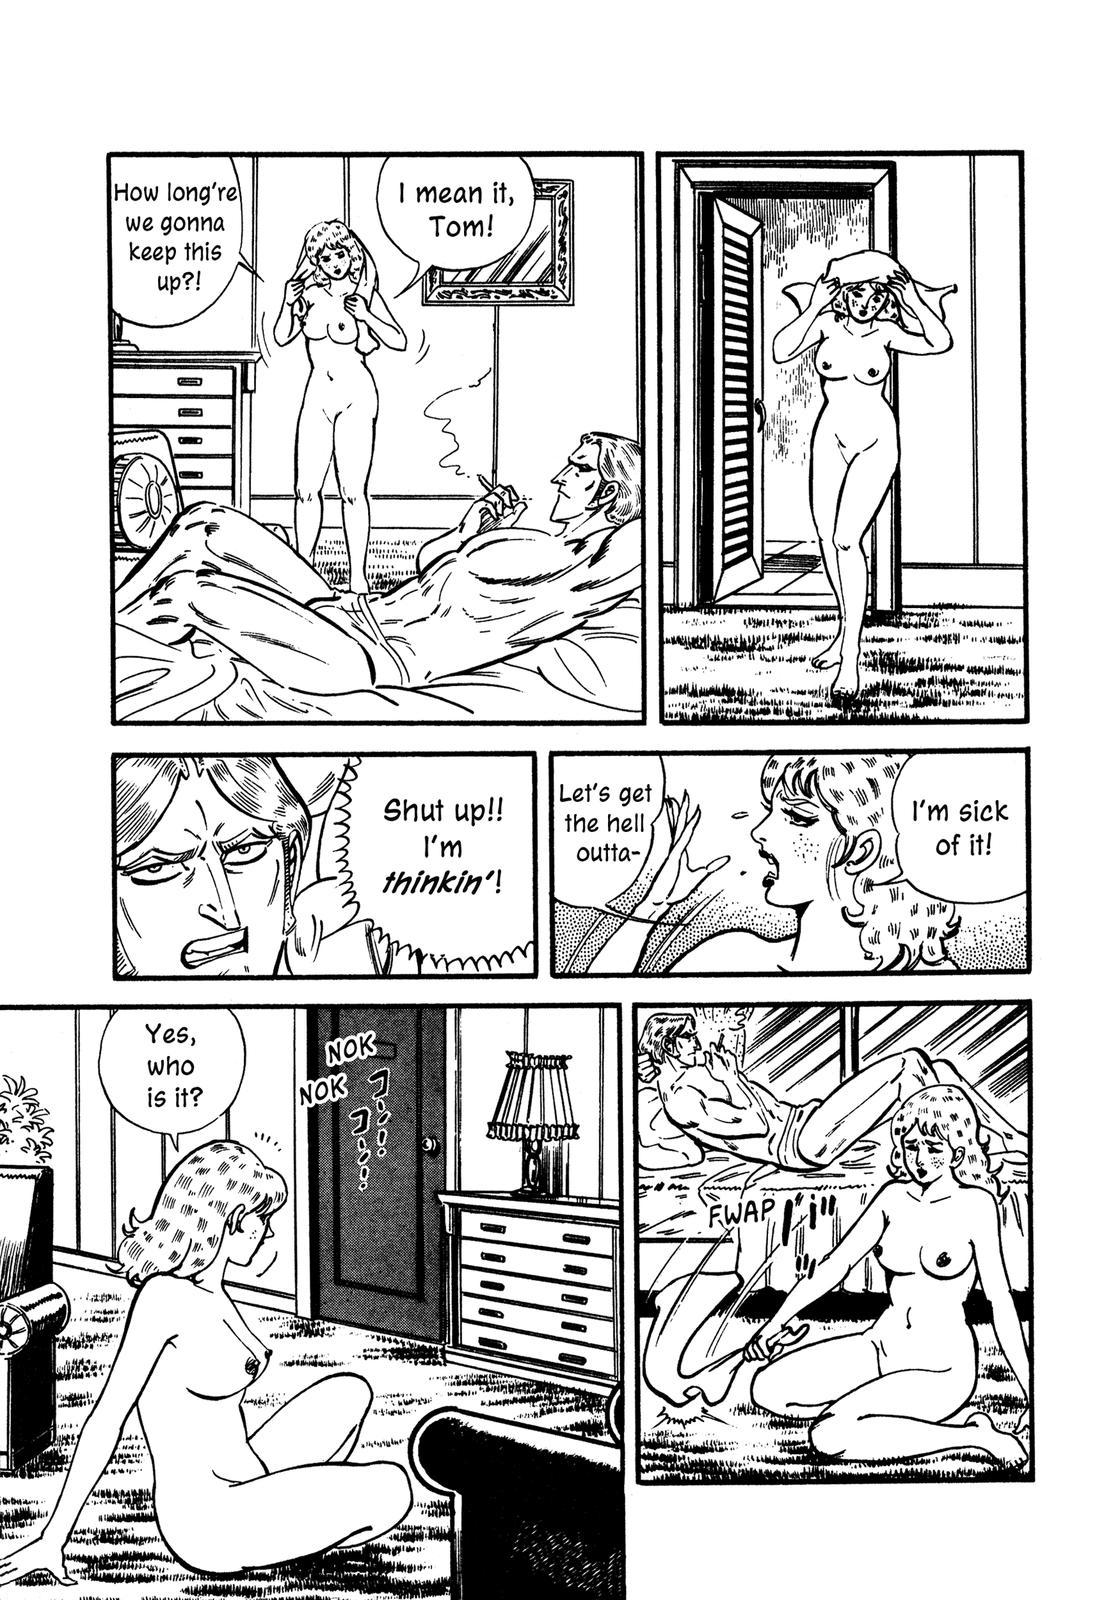 Doll: The Hotel Detective Vol. 2 Ch. 7 The Longest Day